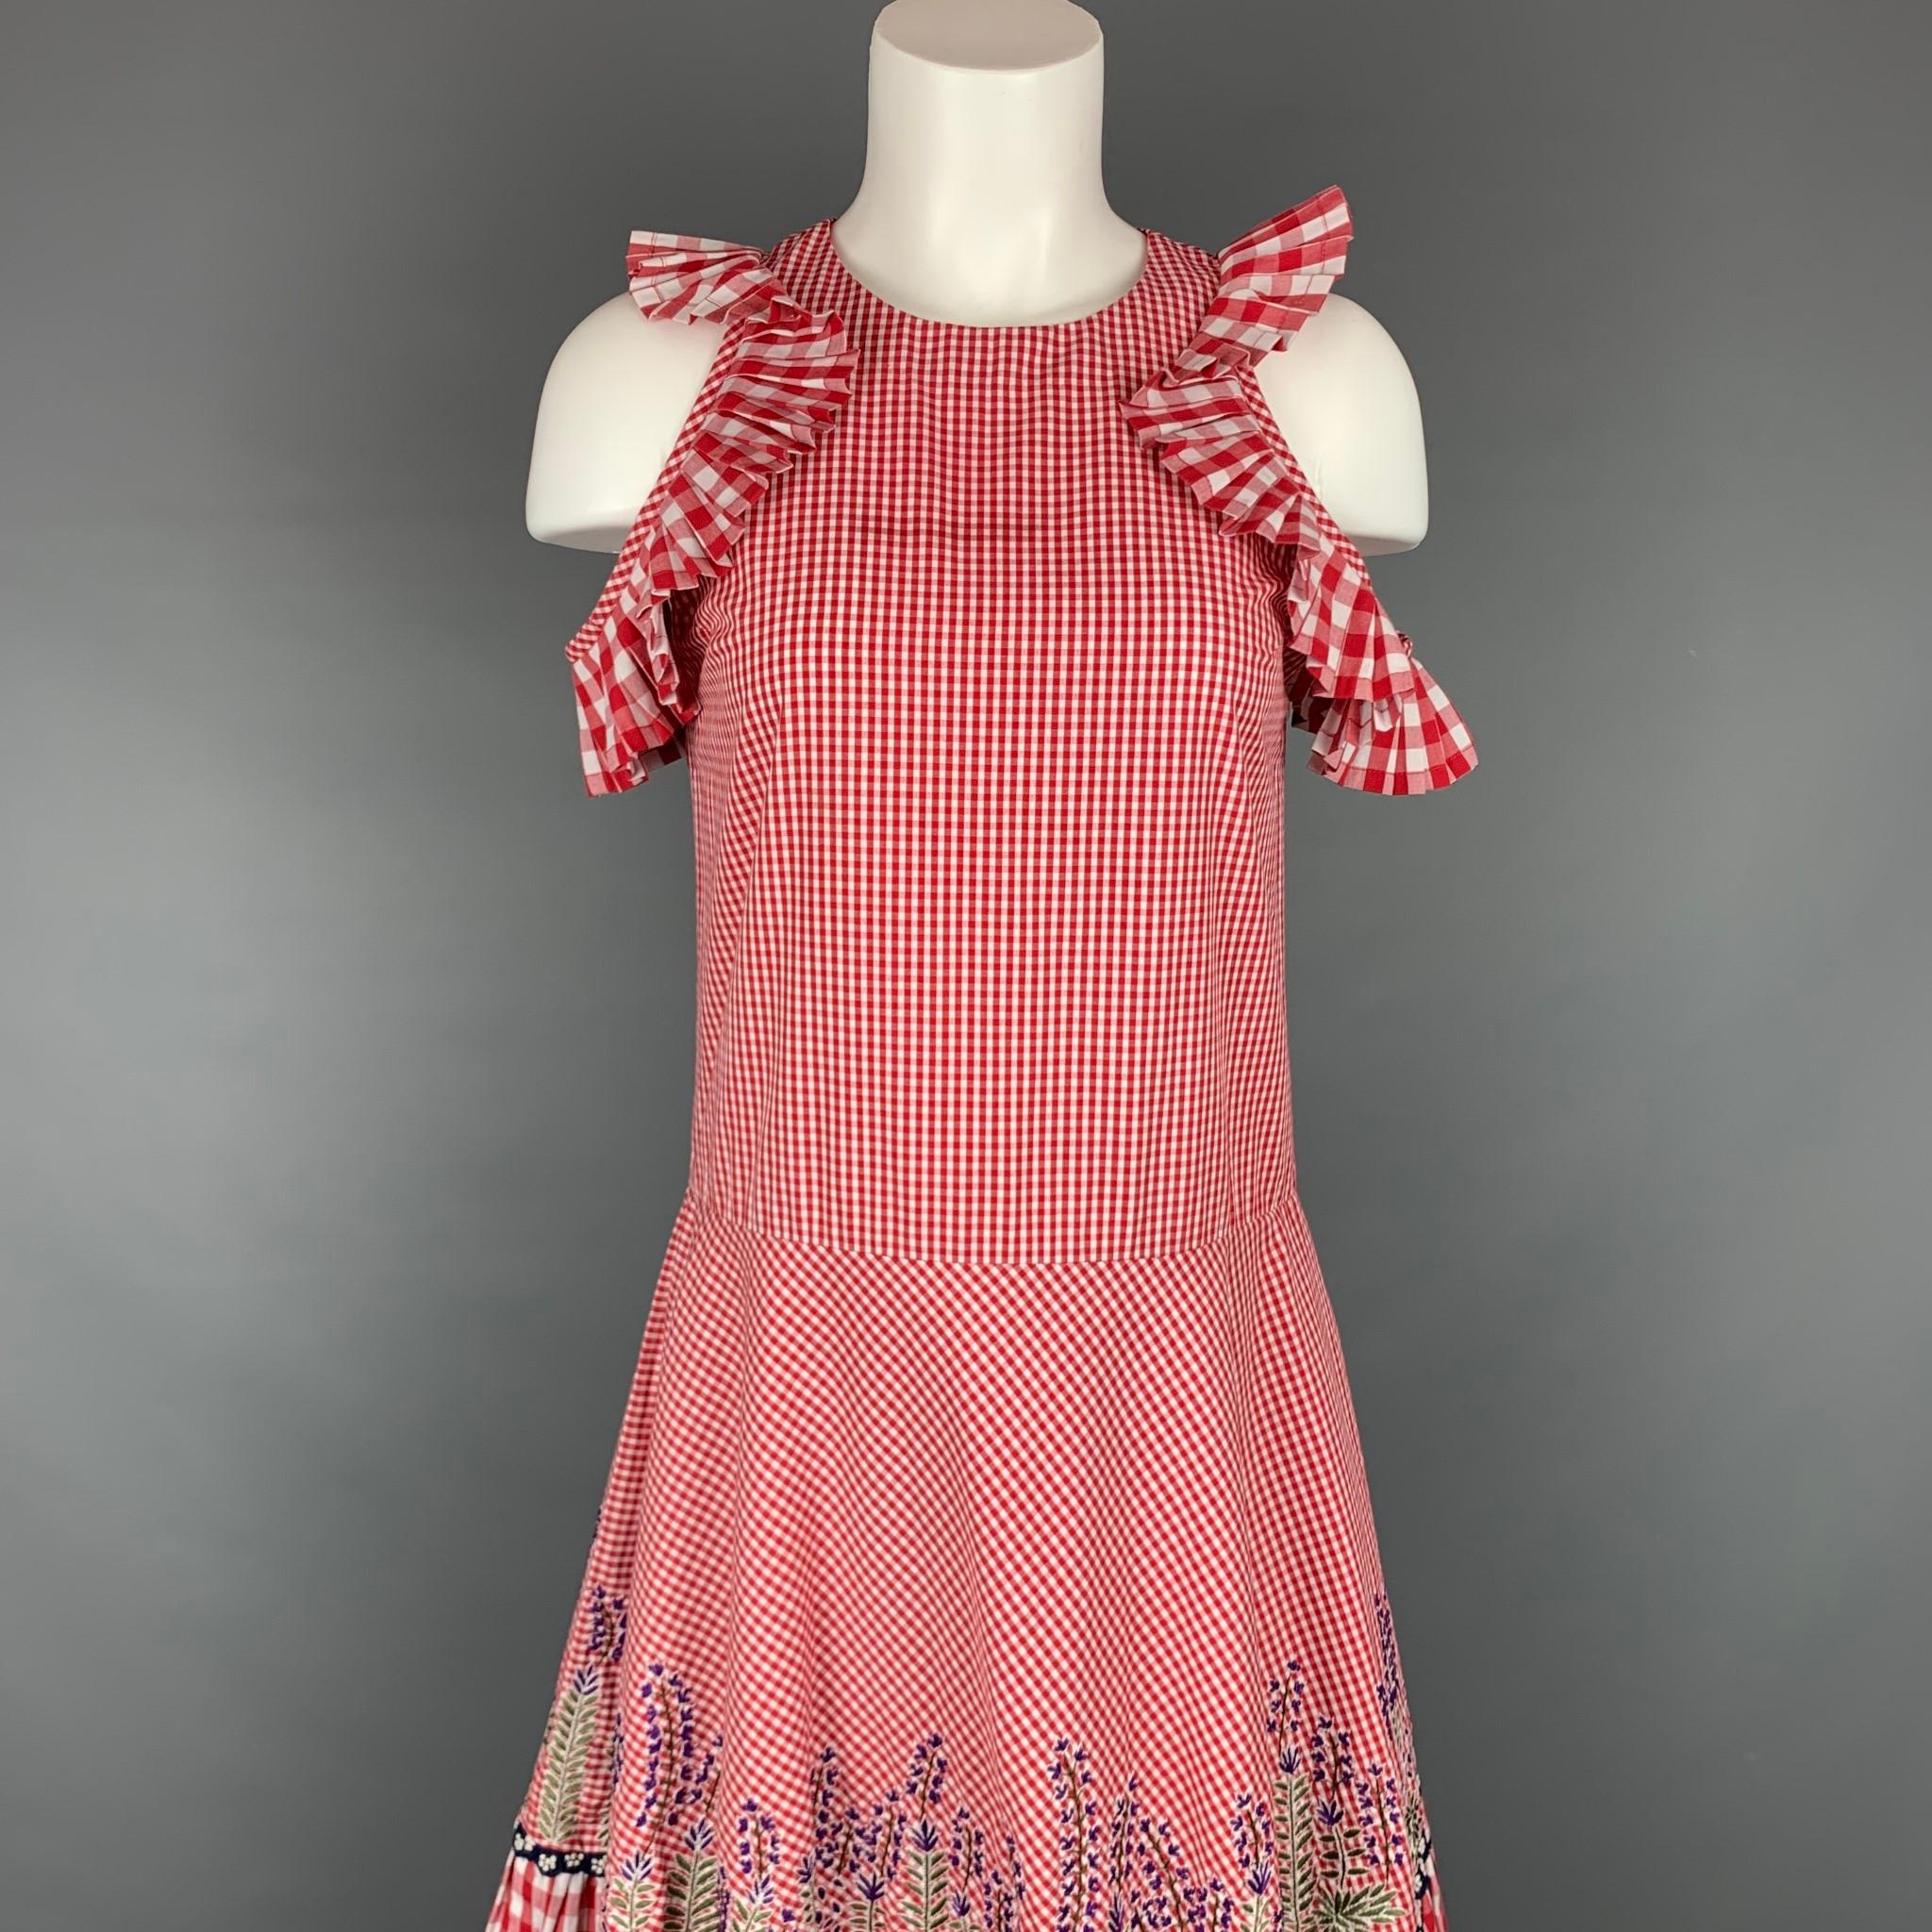 RAHUL MISHRA 2017 dress comes in a red & white gingham material with embroidered details featuring pleated ruffles, sleeveless, and a back zipper closure.

Very Good Pre-Owned Condition. Minor discoloration at front.
Marked: XS
Original Retail